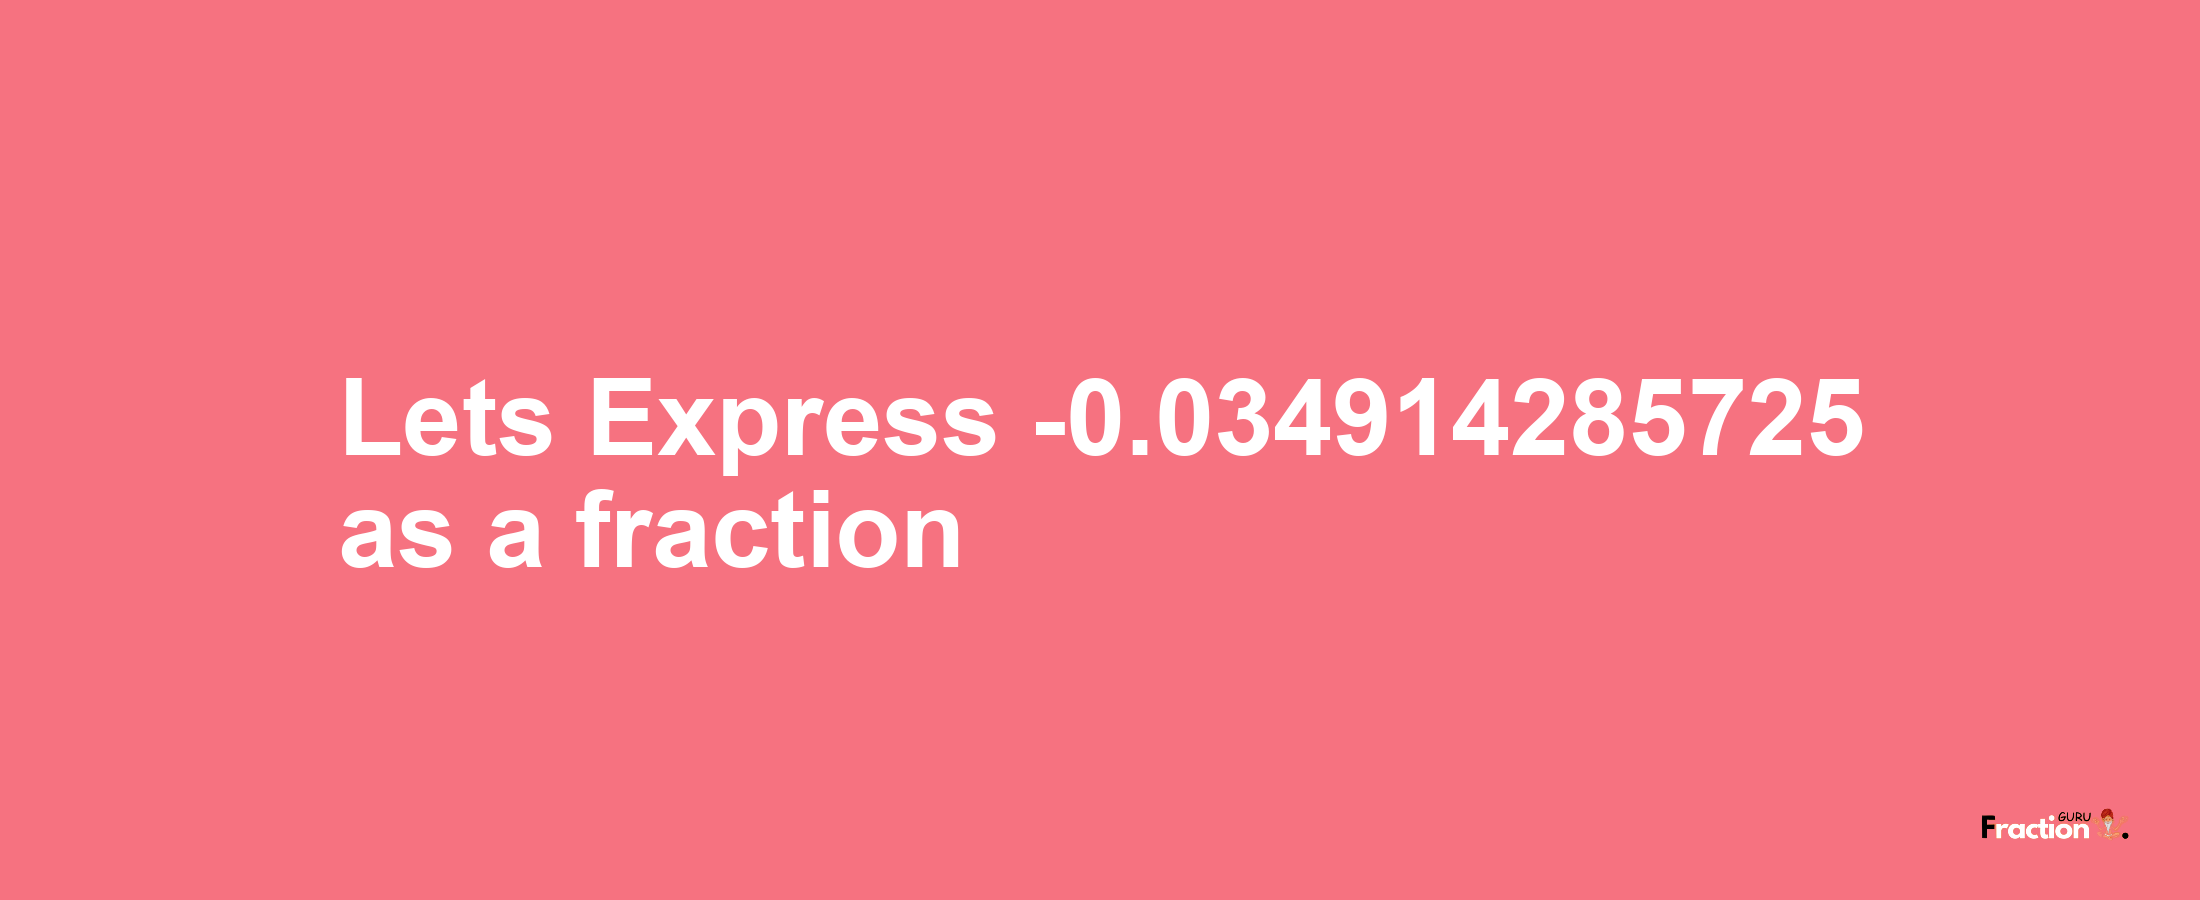 Lets Express -0.034914285725 as afraction